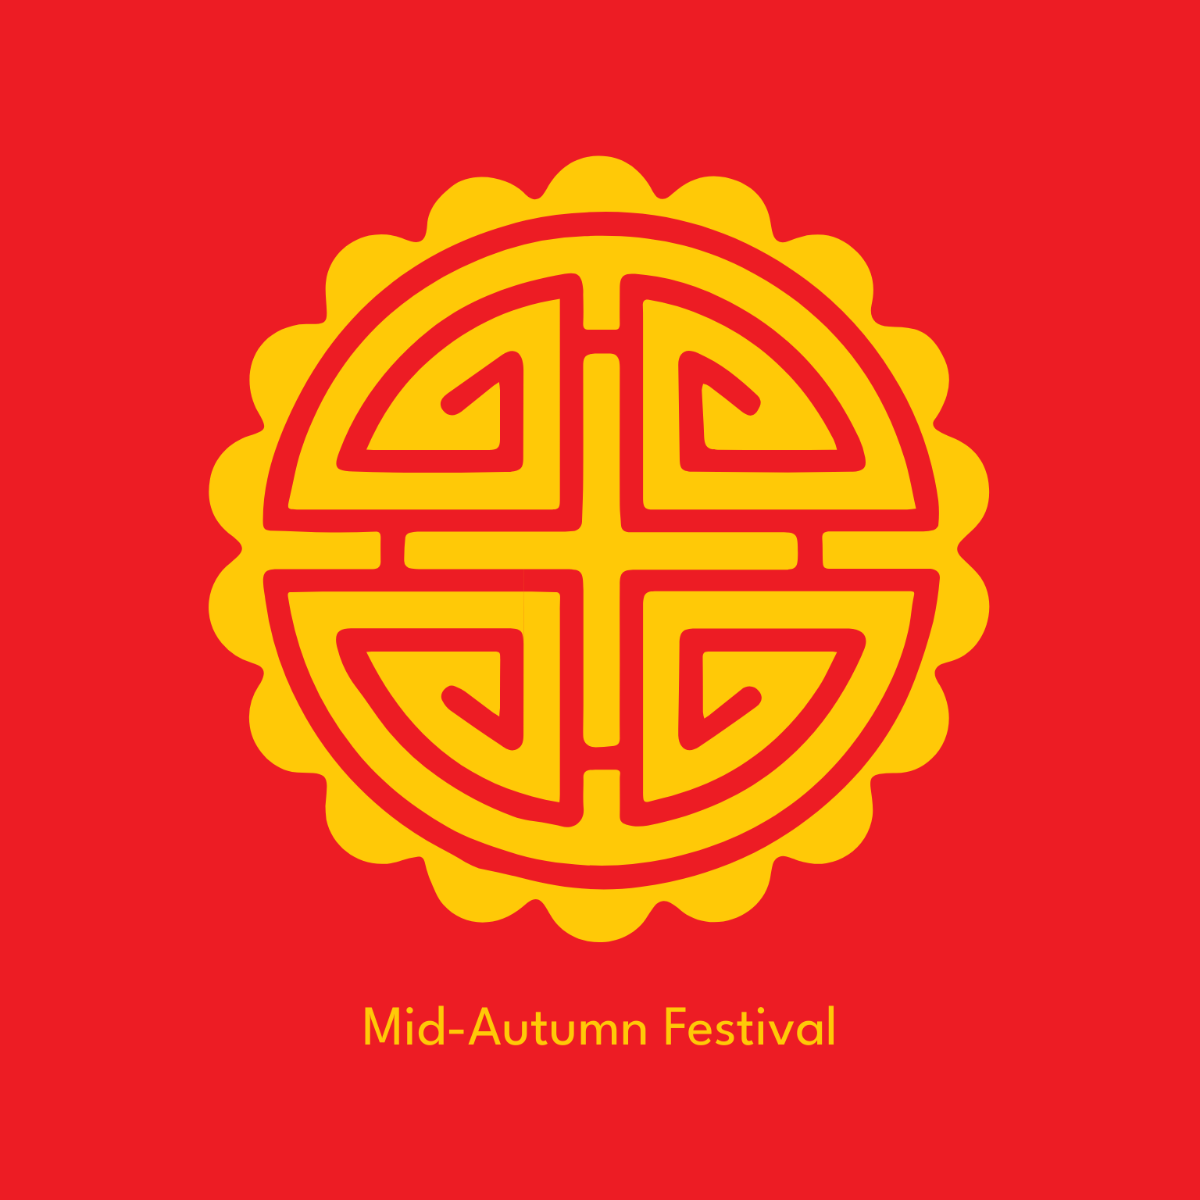 Free Mid-Autumn Festival Sign Vector Template